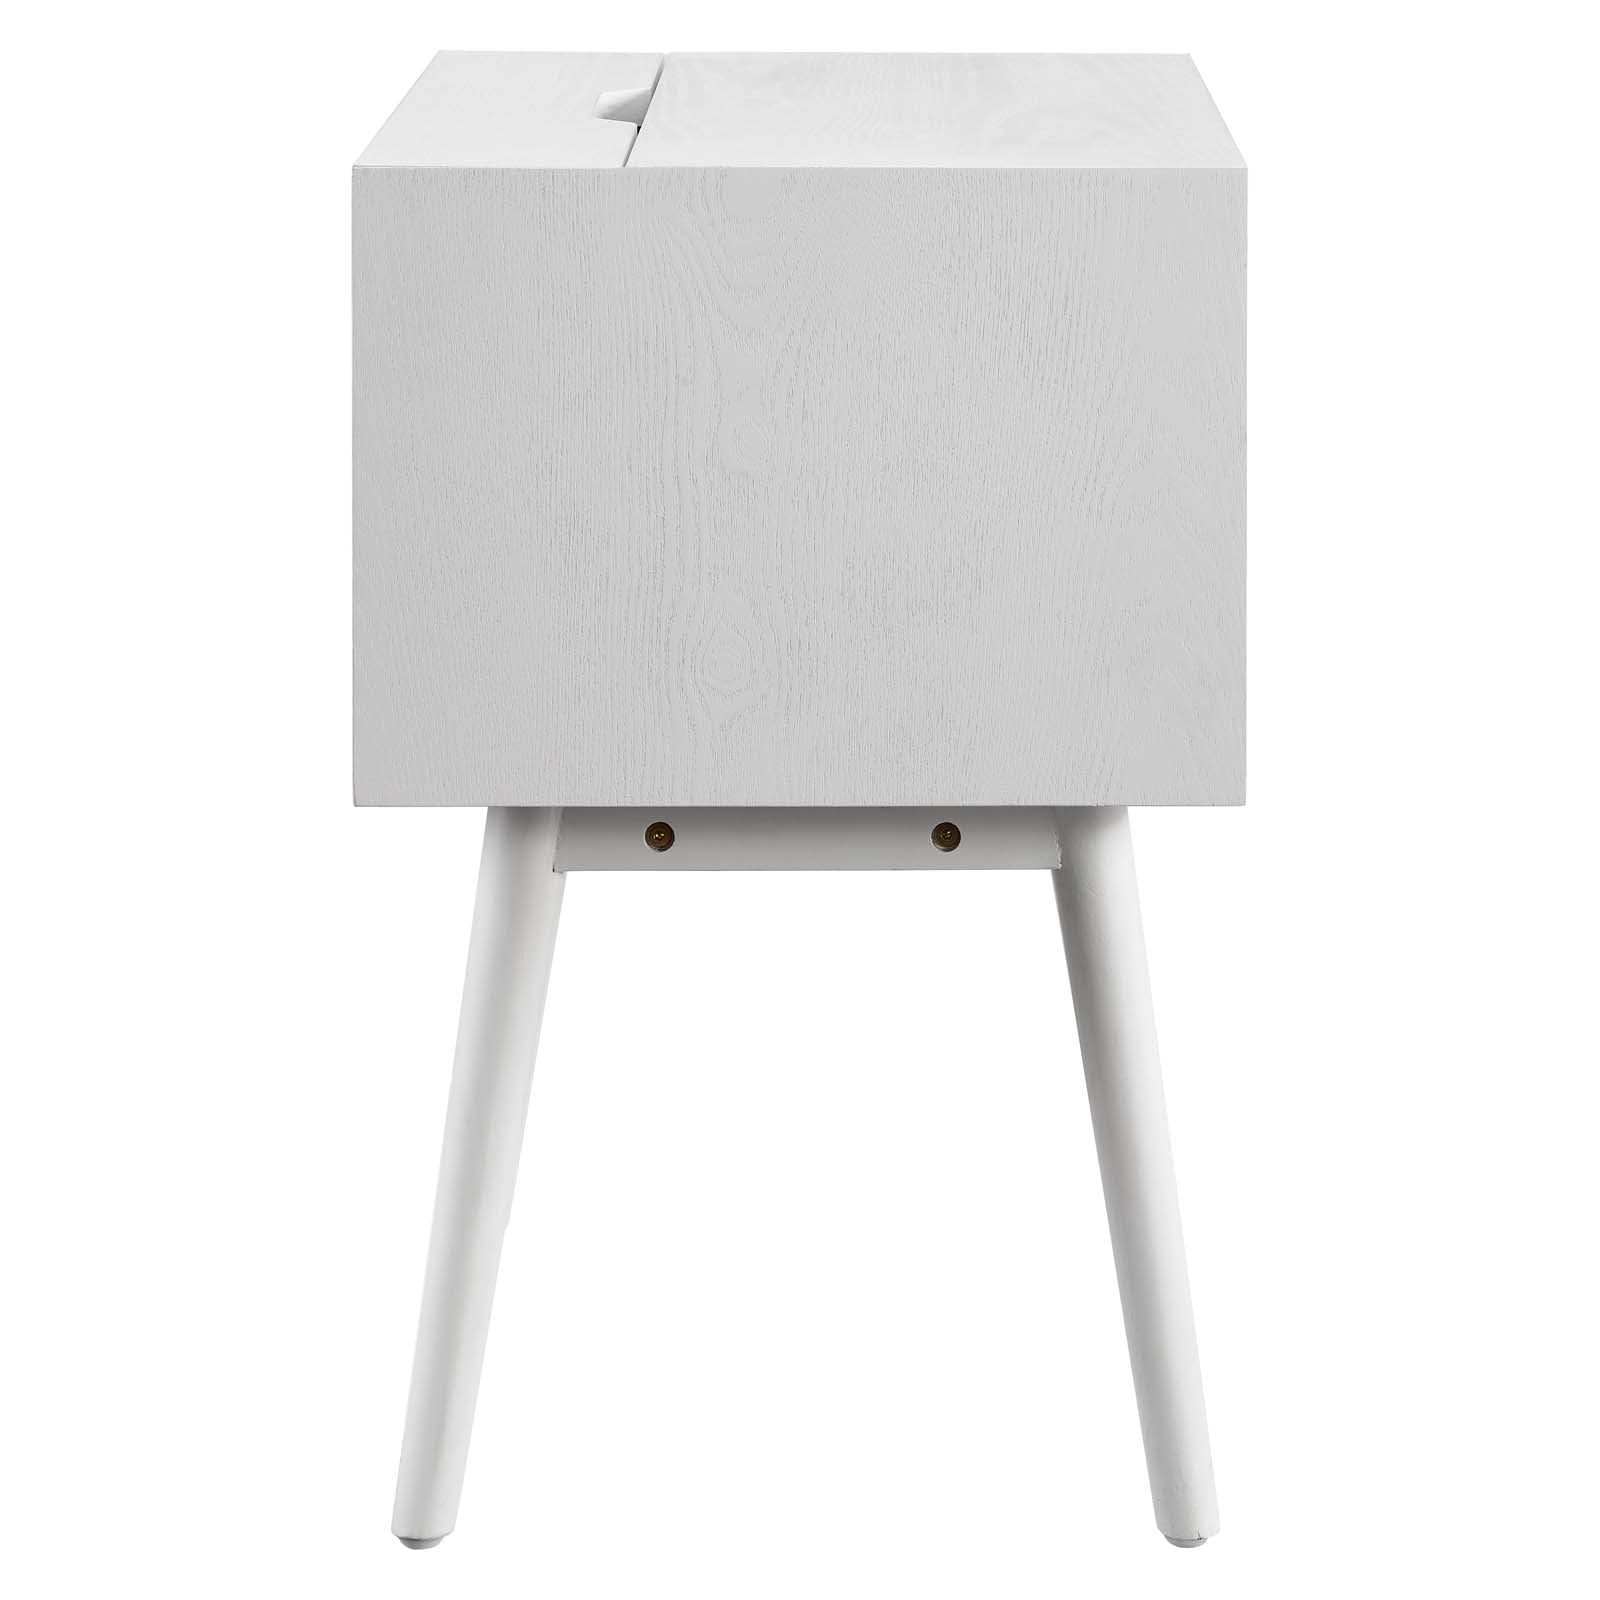 Modway Nightstands & Side Tables - Ember Wood Nightstand With USB Ports White White